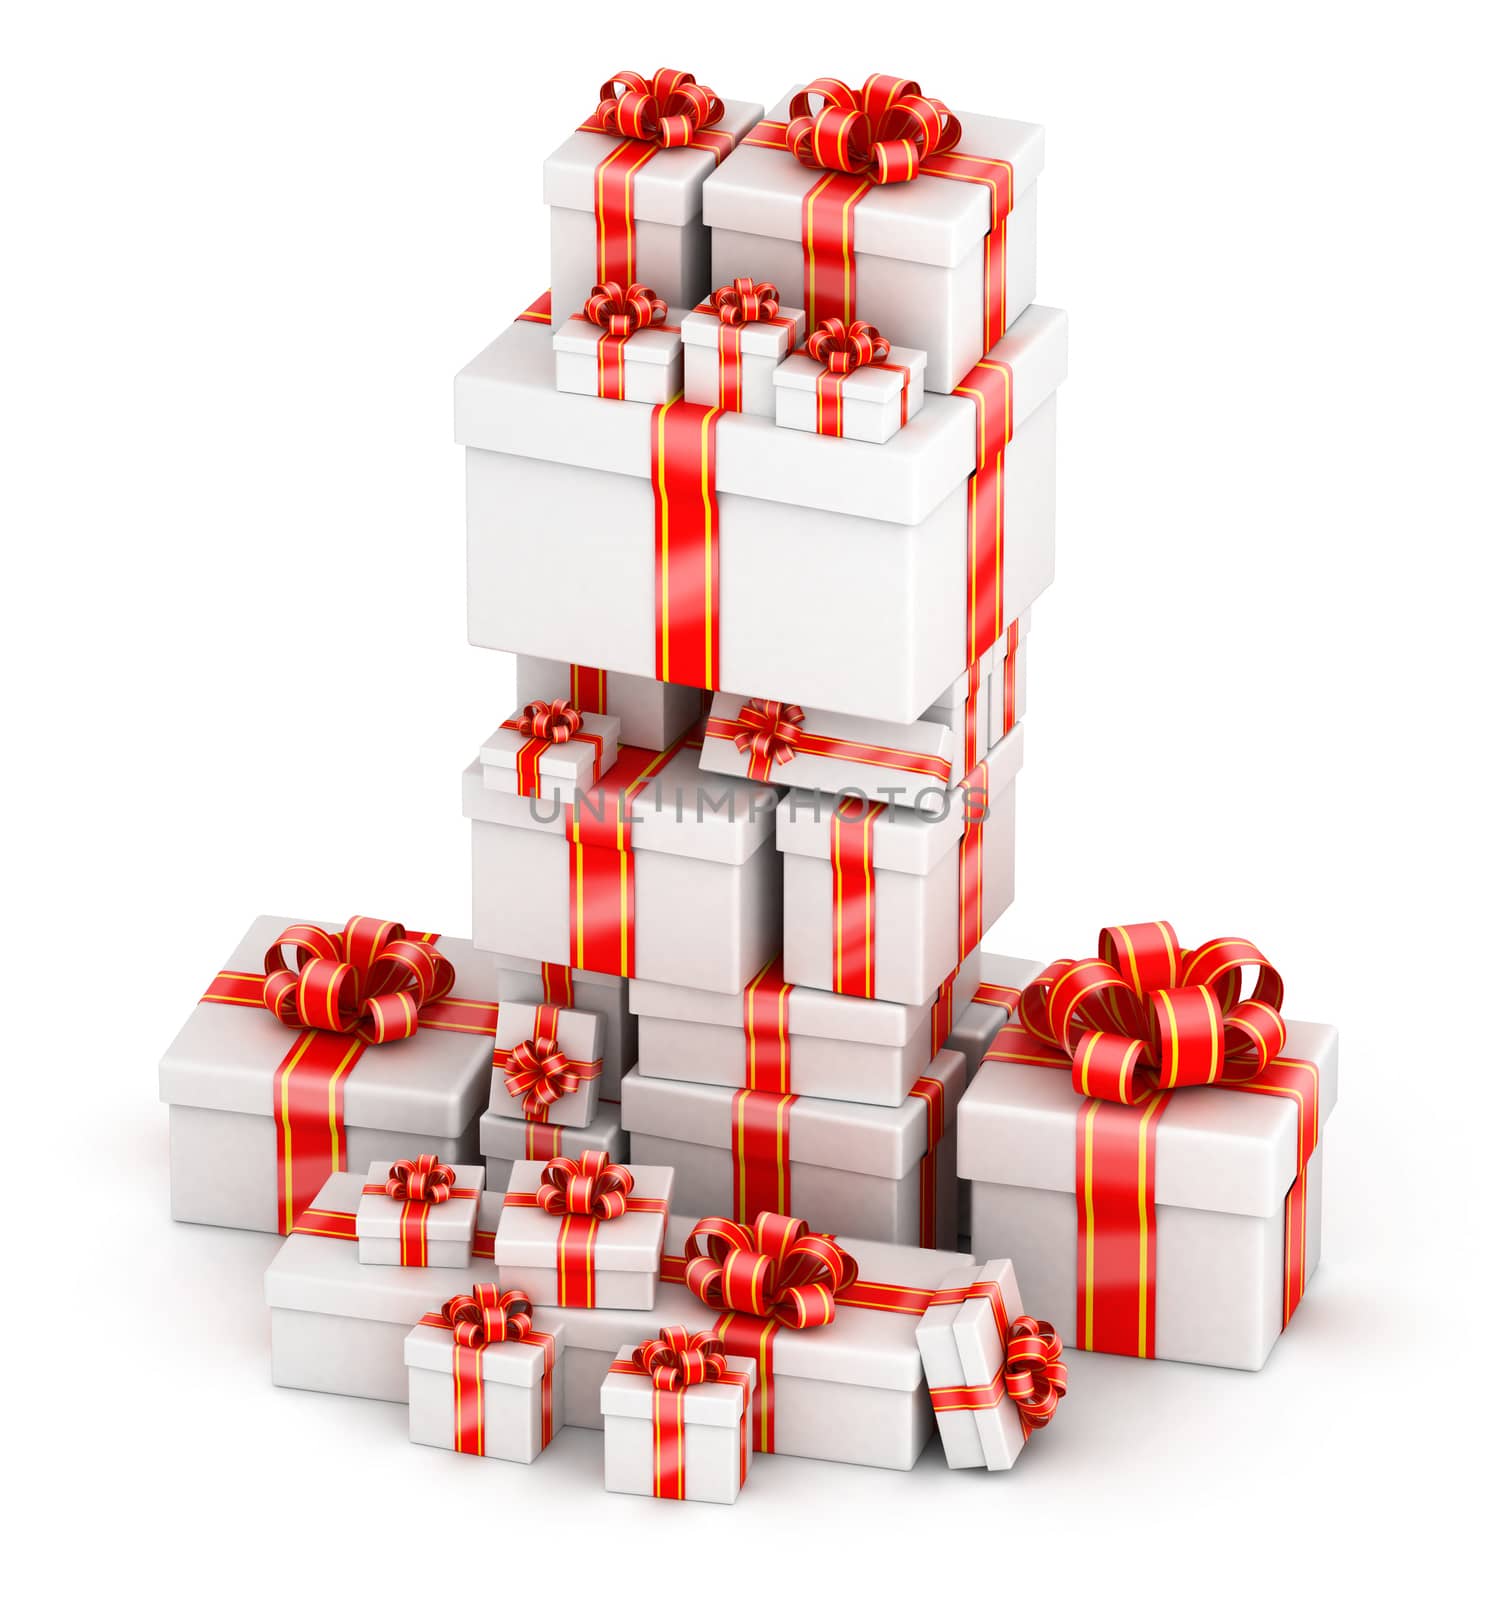 Big stacks of gift boxes by iunewind